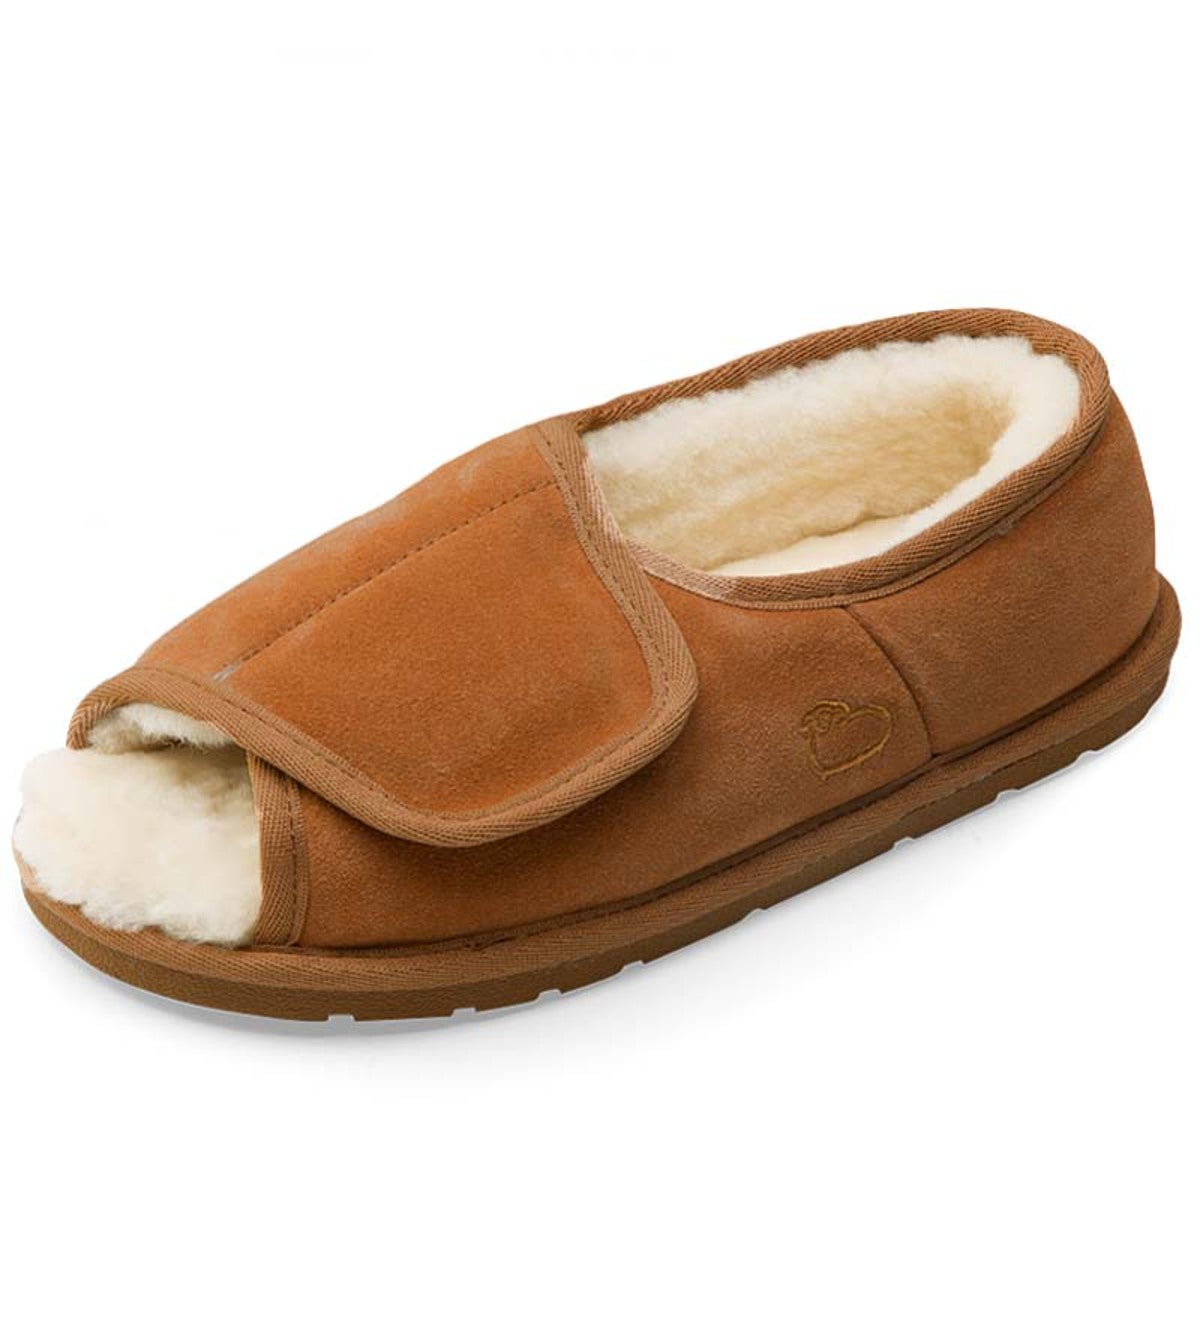 Men's Sheepskin Wrap Slippers With Closed Back - Size=L (10-11 ...